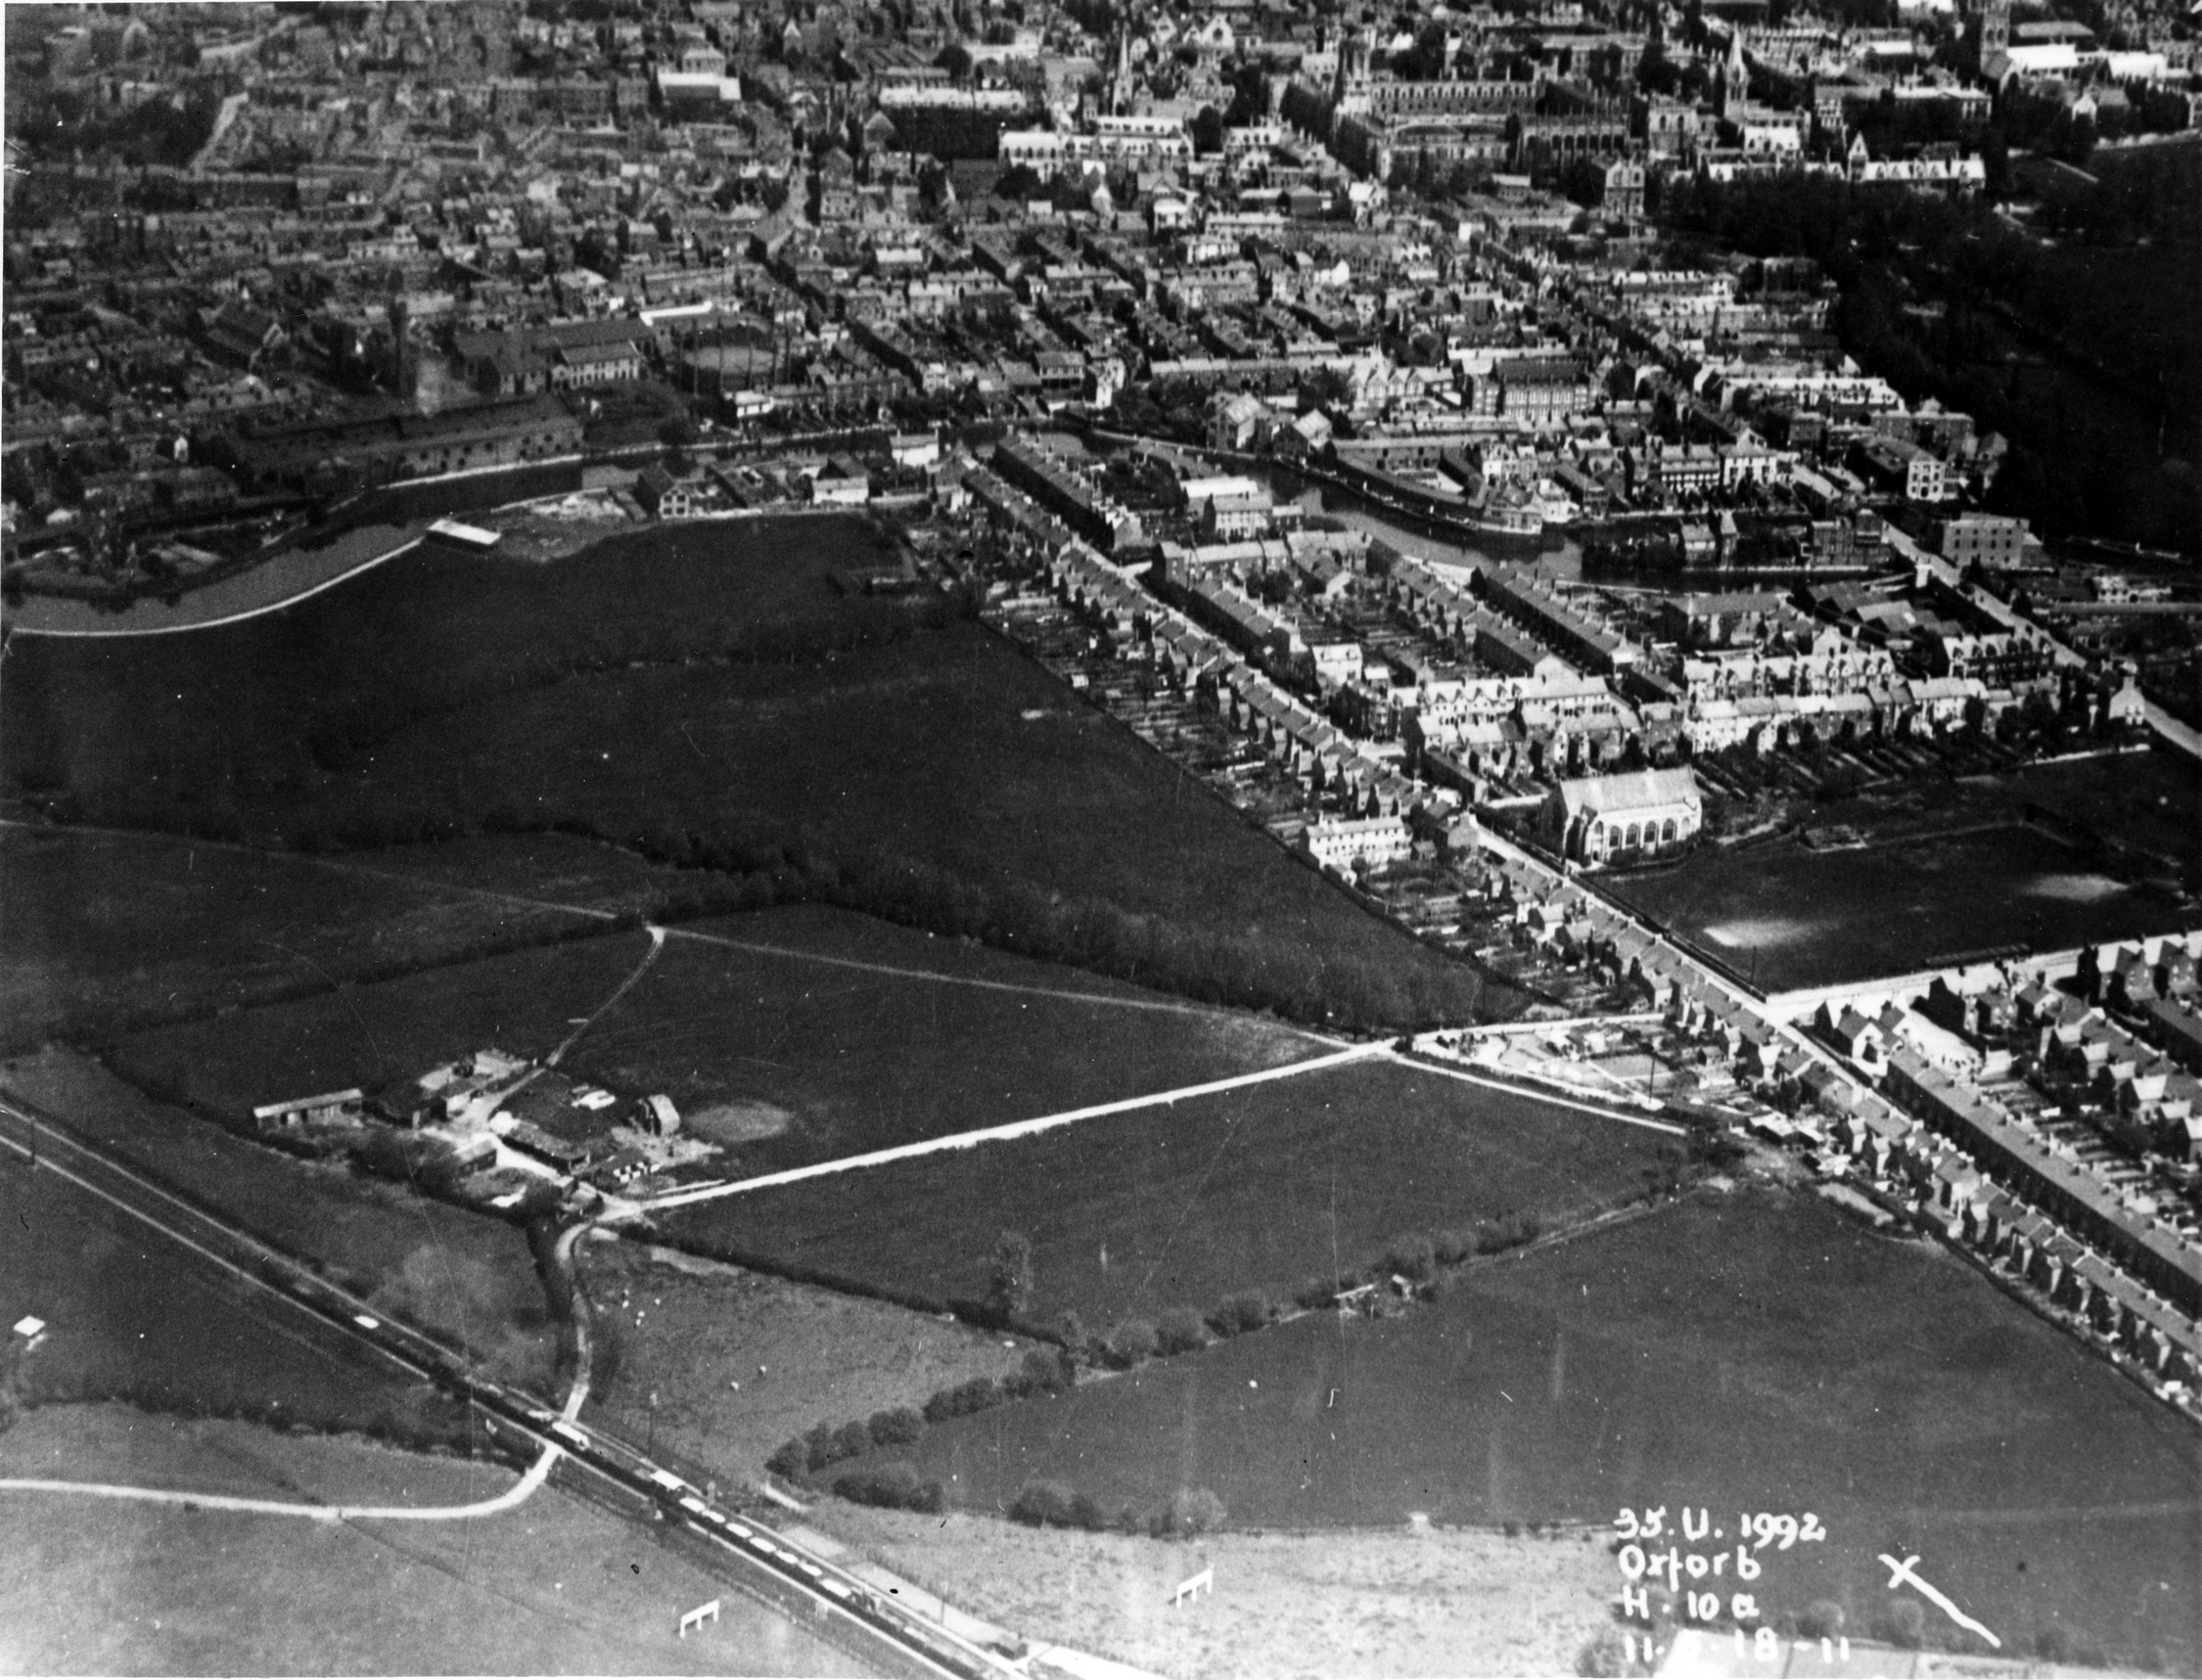 Grandpont from the air 1918